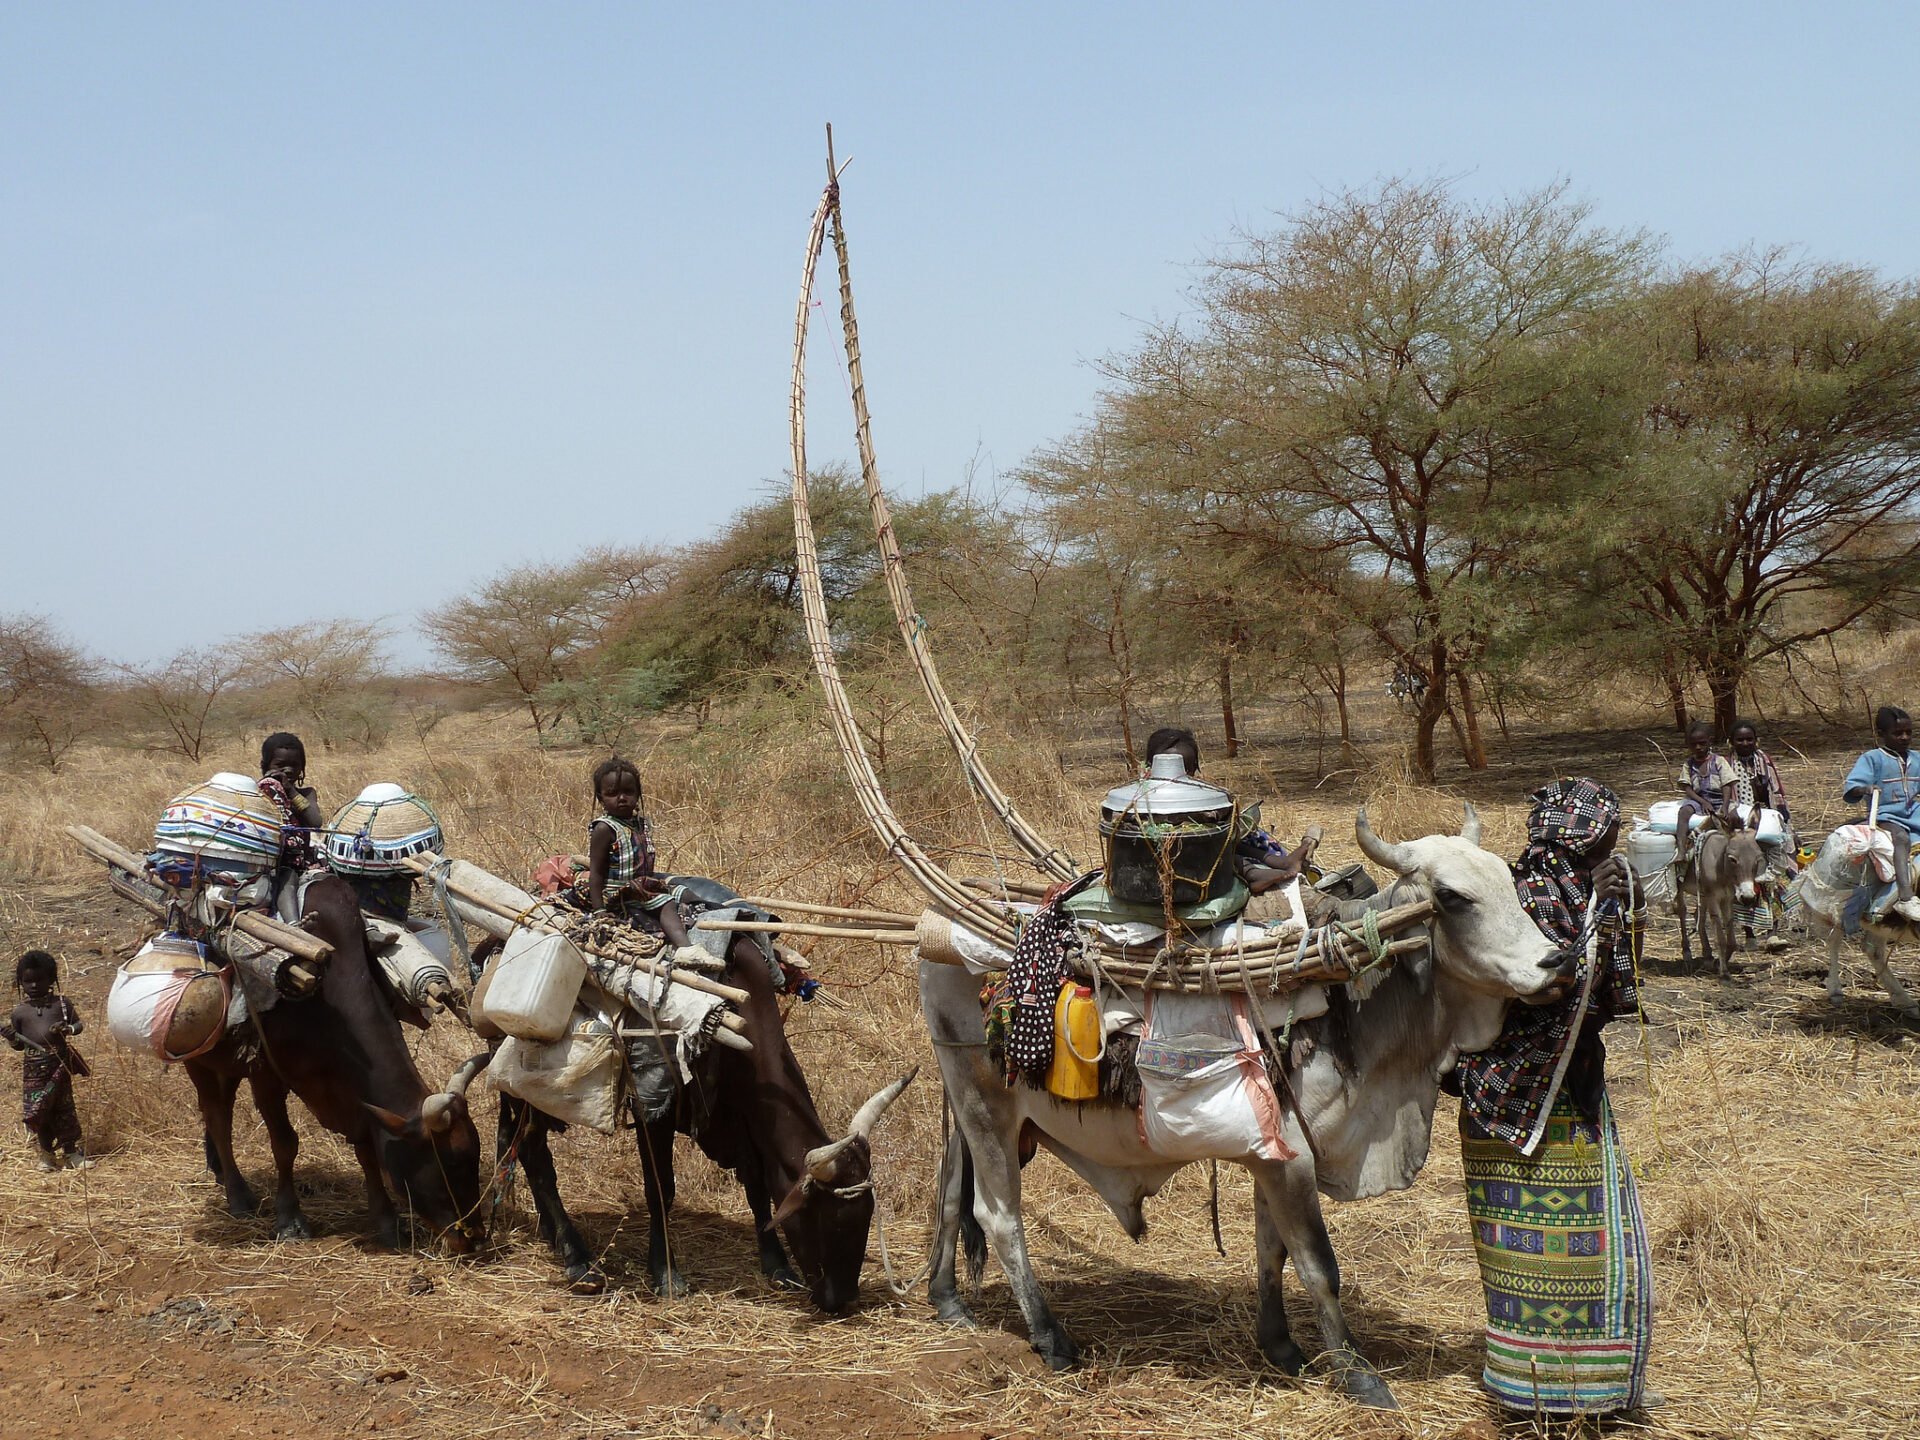 A famiy of Falatta nomads making their abbual journey from Sudan to South Sudan. Credit: BBC World Service (https://www.flickr.com/photos/bbcworldservice)